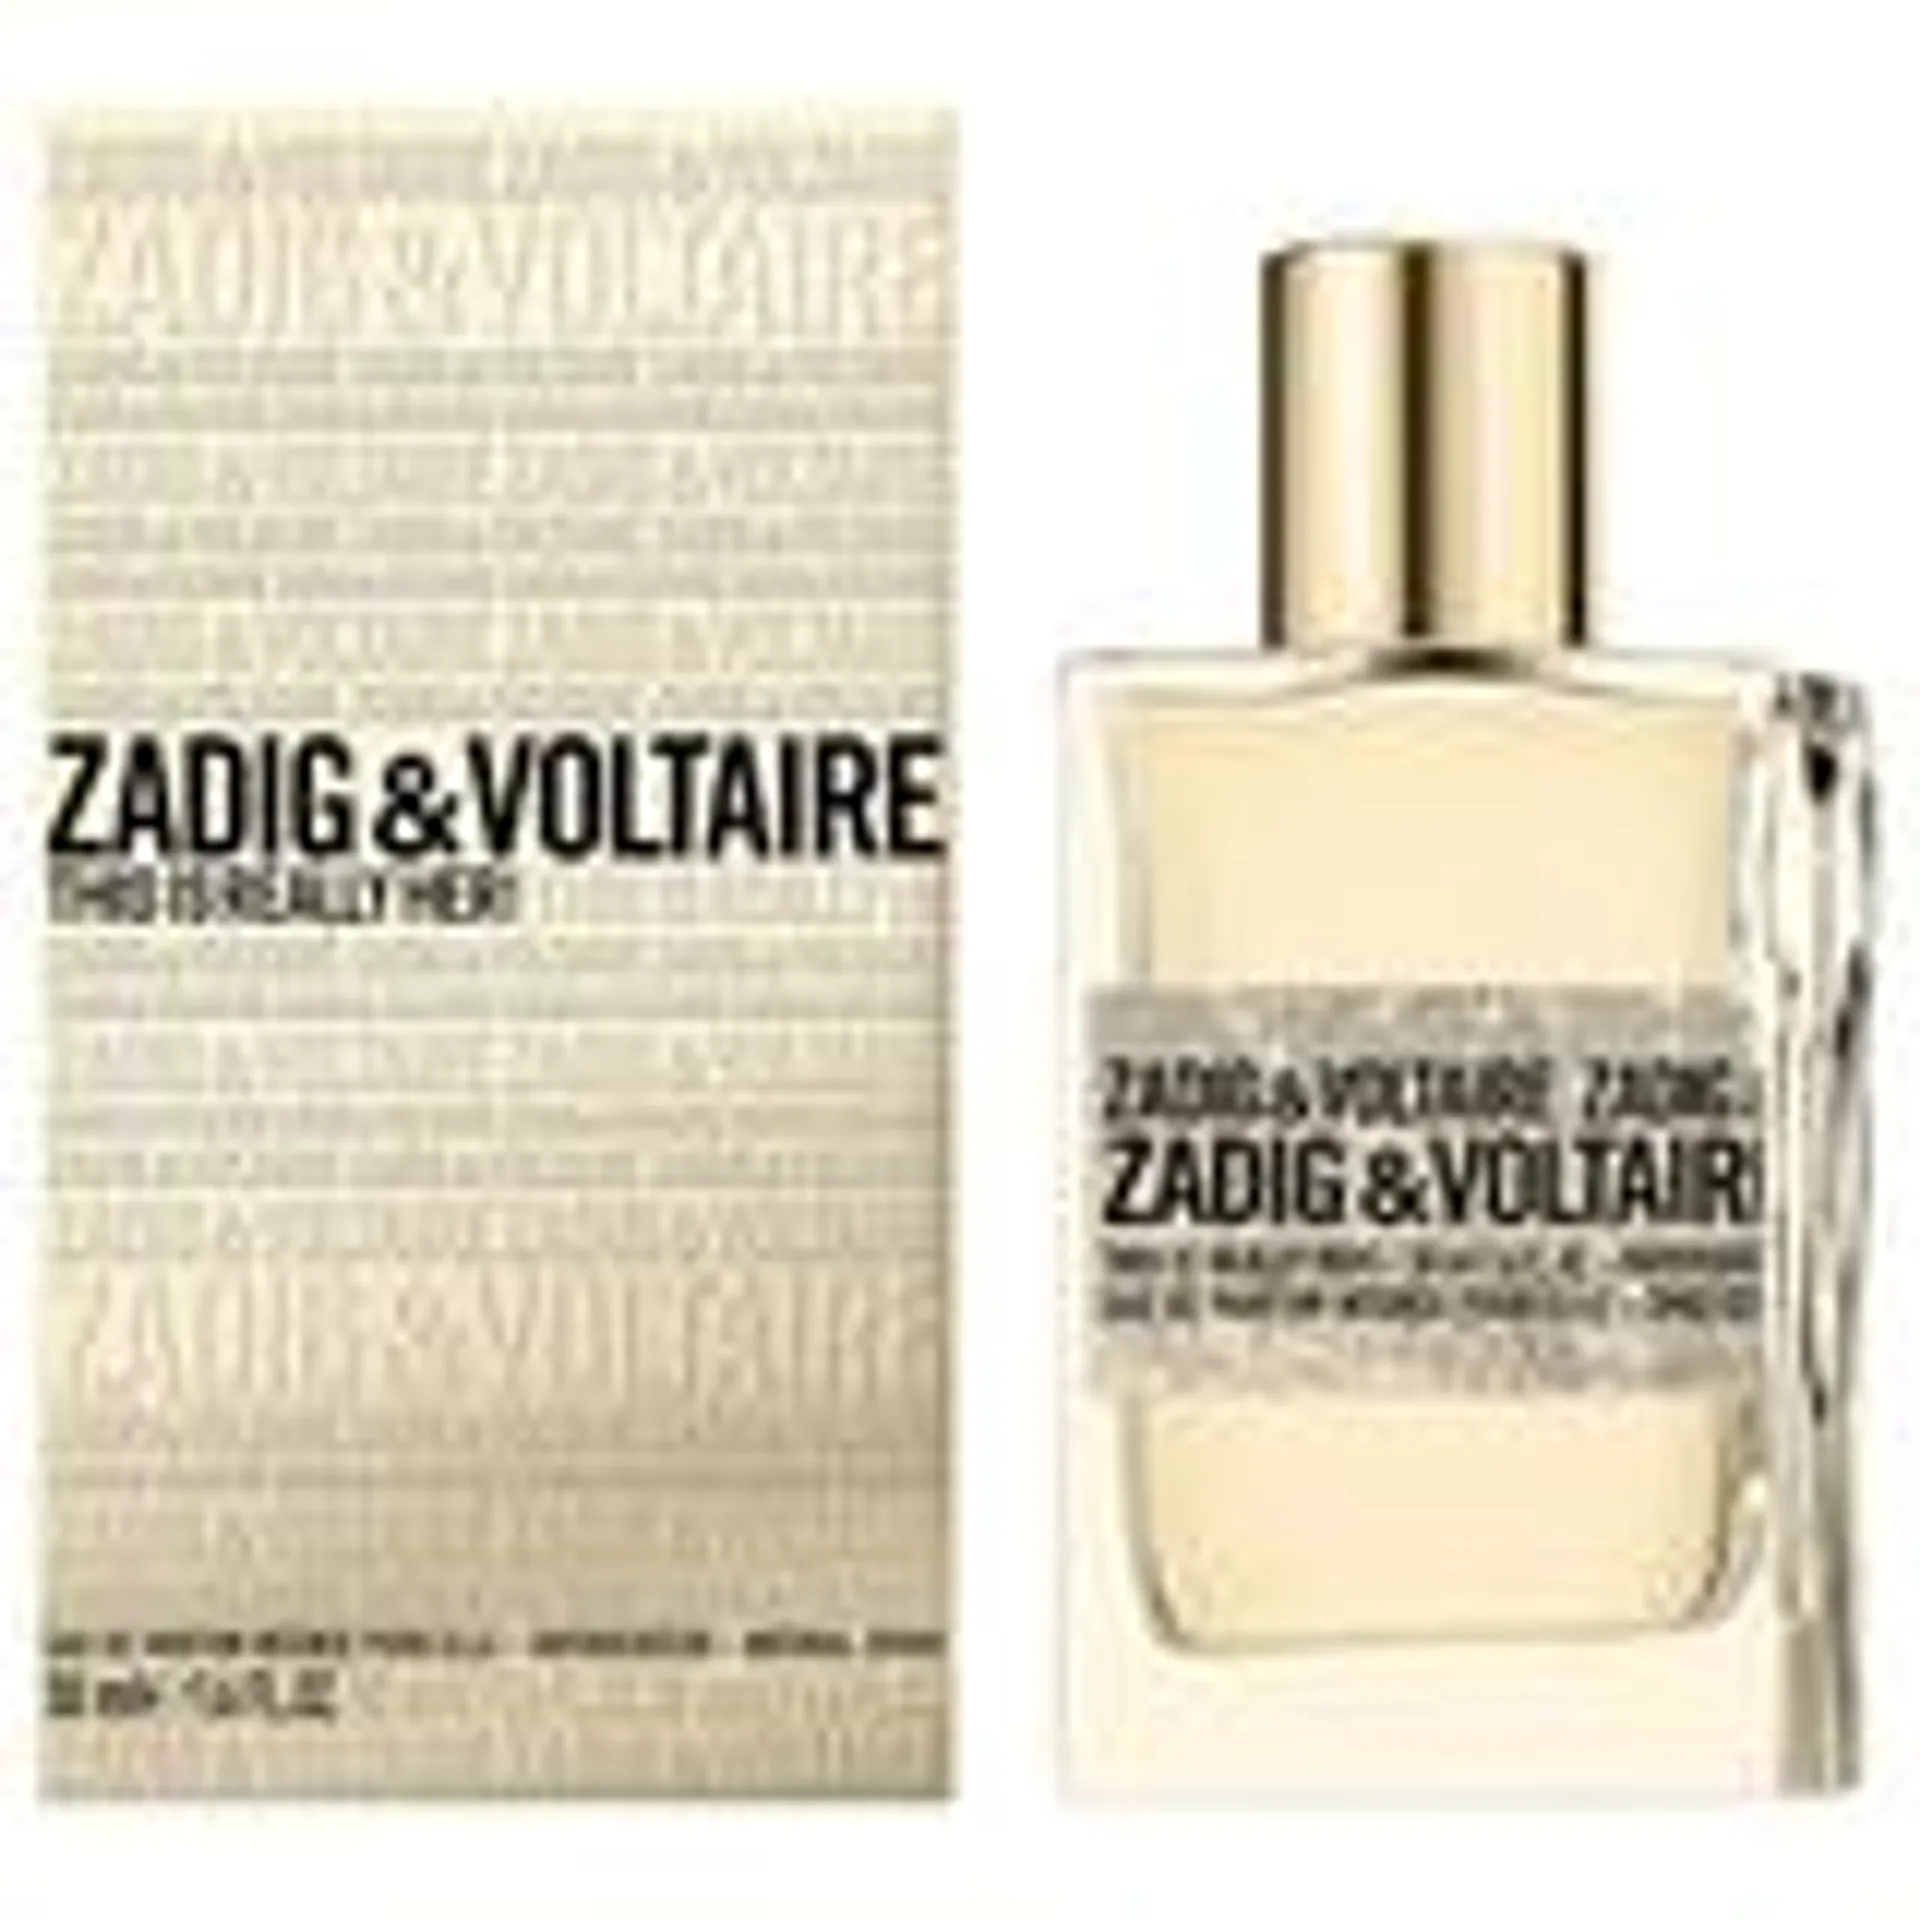 ZADIG & VOLTAIRE THIS IS REALLY HER! EDP 50 ML